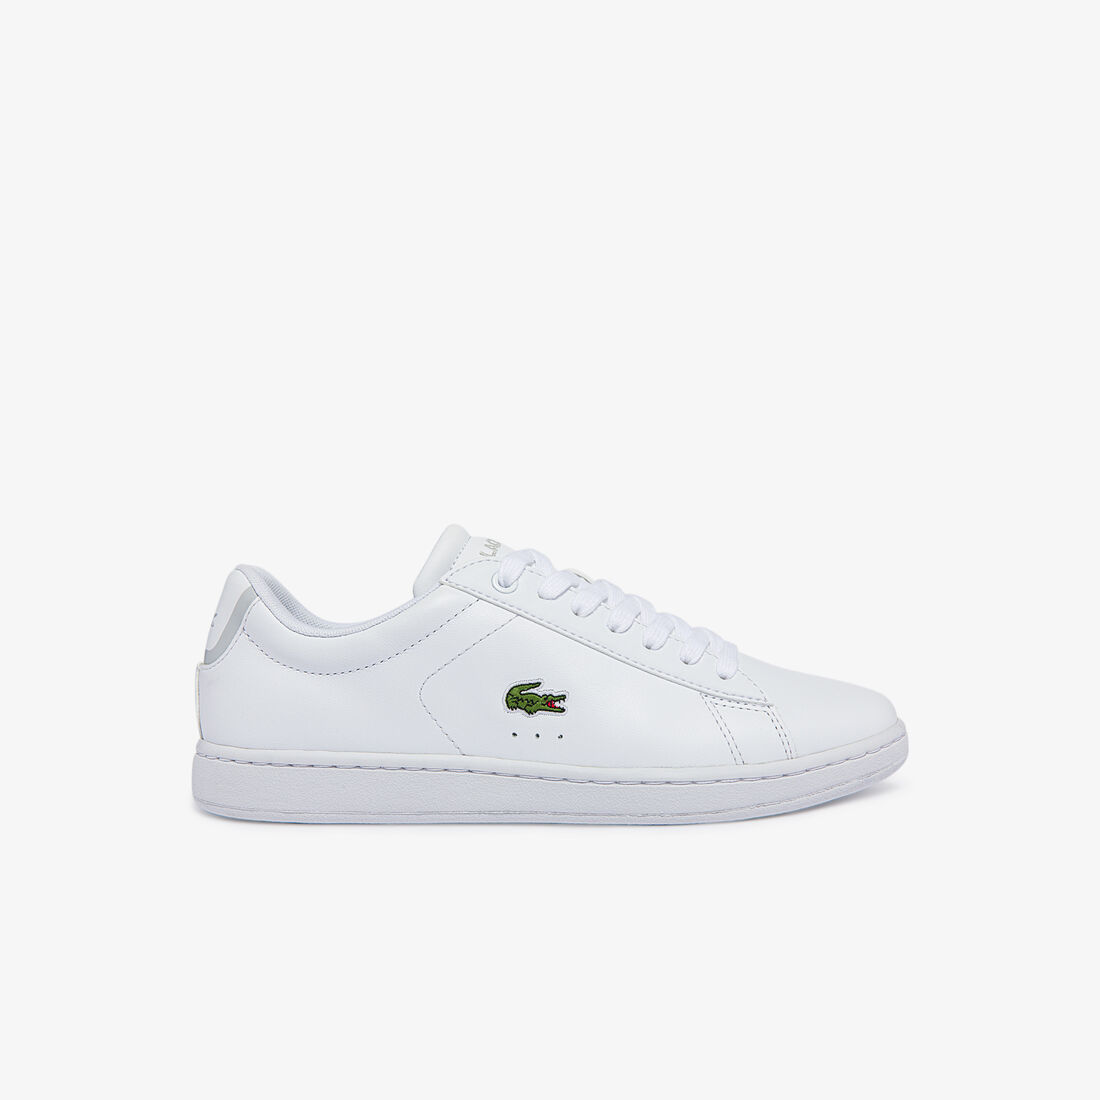 Lacoste Carnaby Evo Bl Leder And Synthetik Sneakers Damen Weiß | CPHY-43526